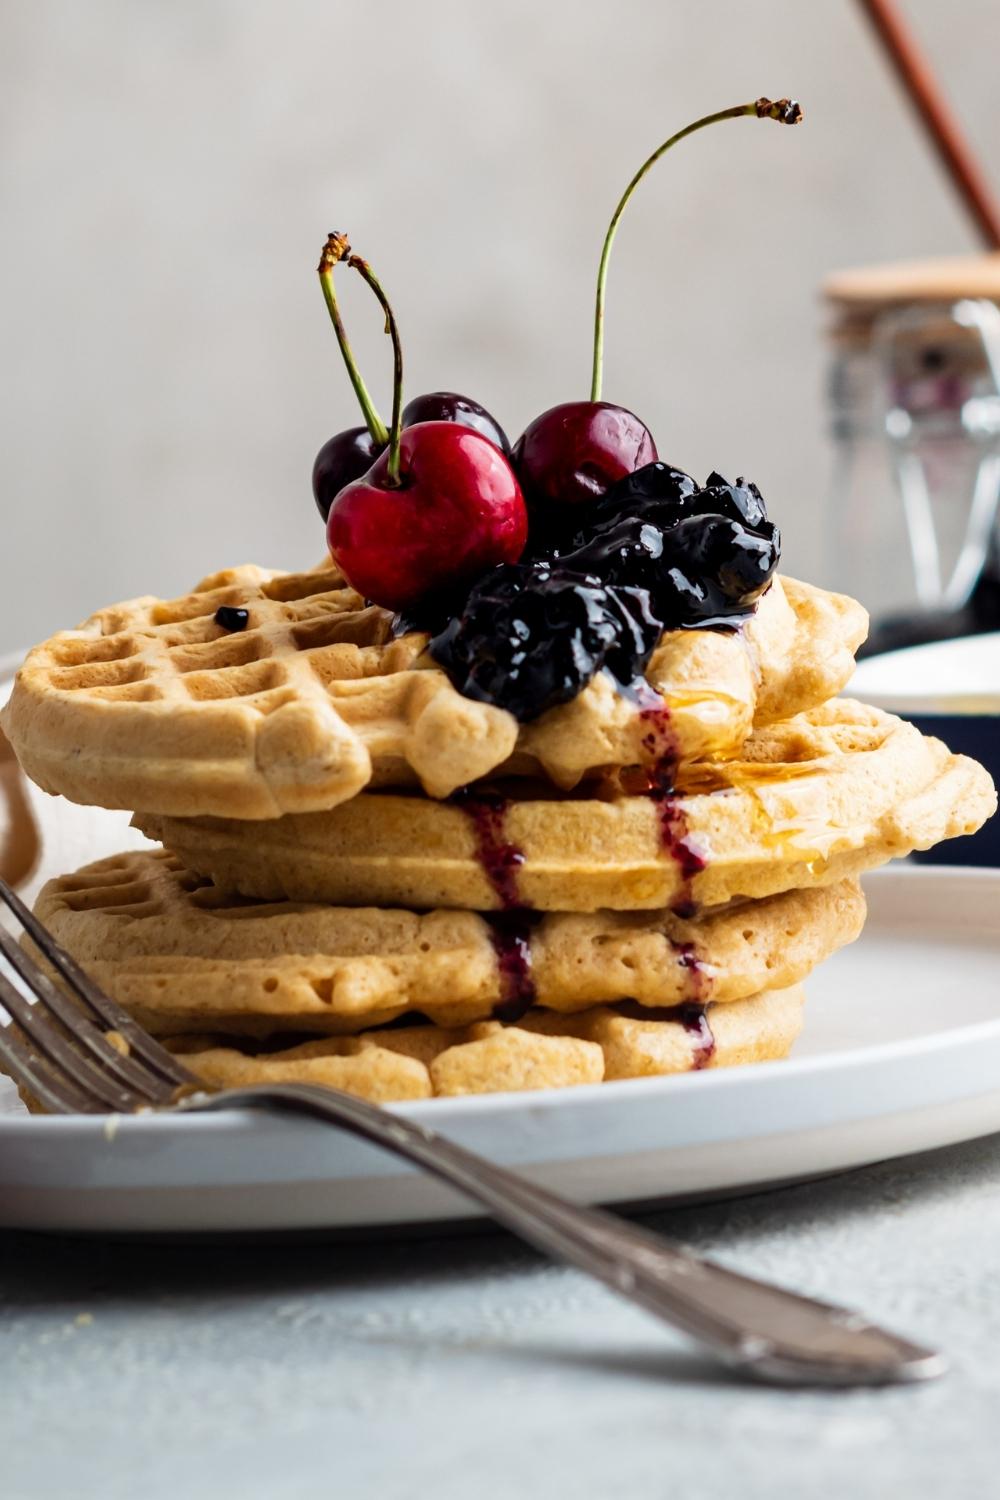 A stack of four homemade waffles without milk, drizzled with honey and topped with fresh berries and cherries.